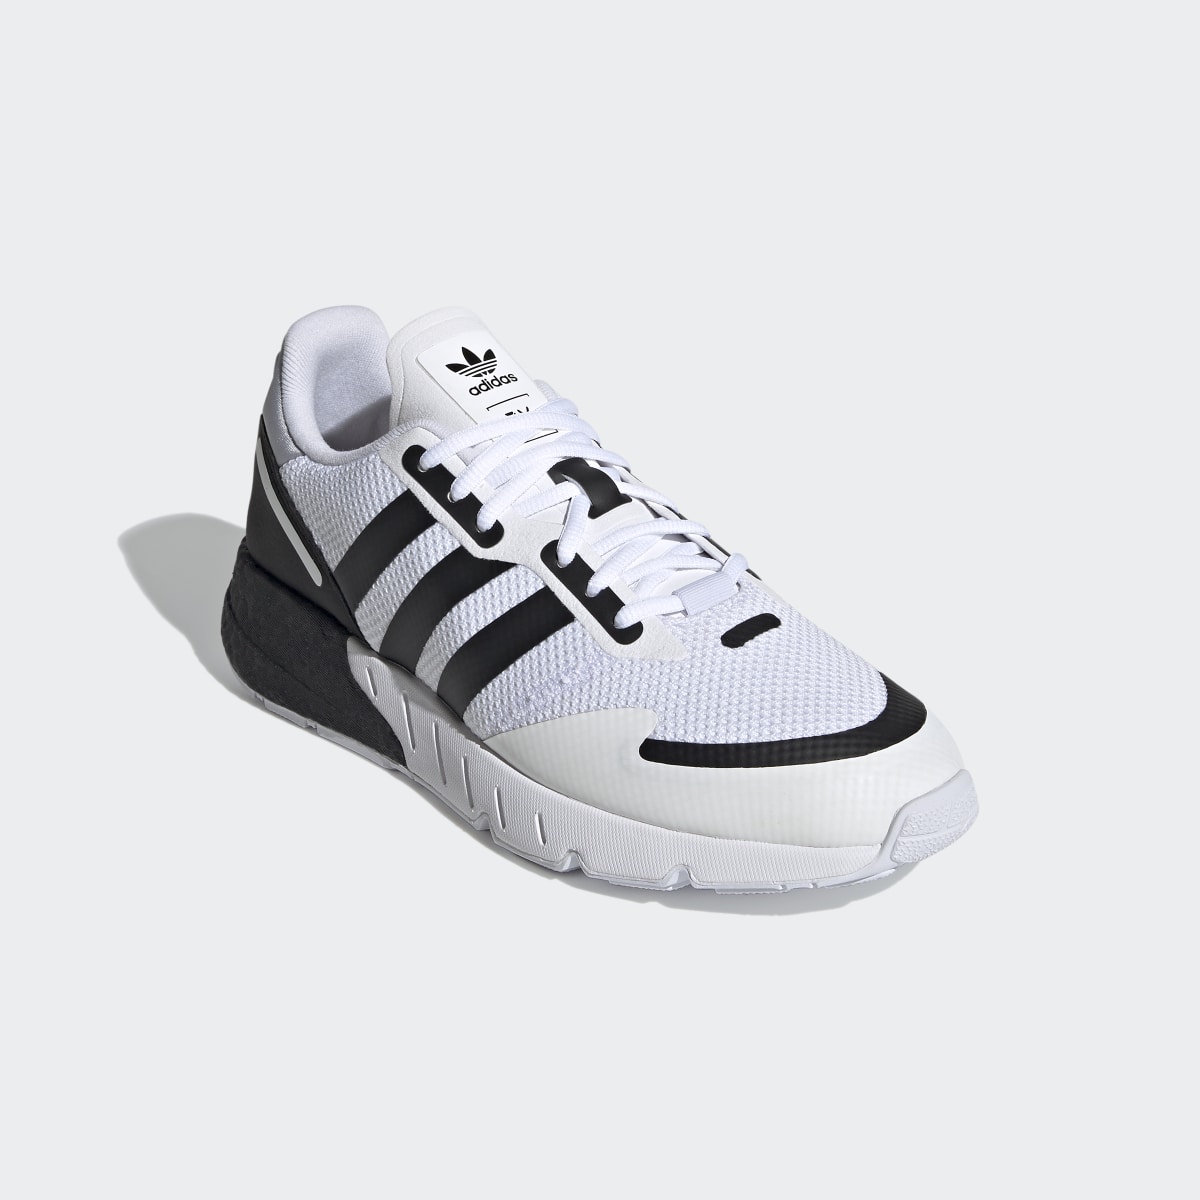 Adidas ZX 1K Boost Shoes. 5